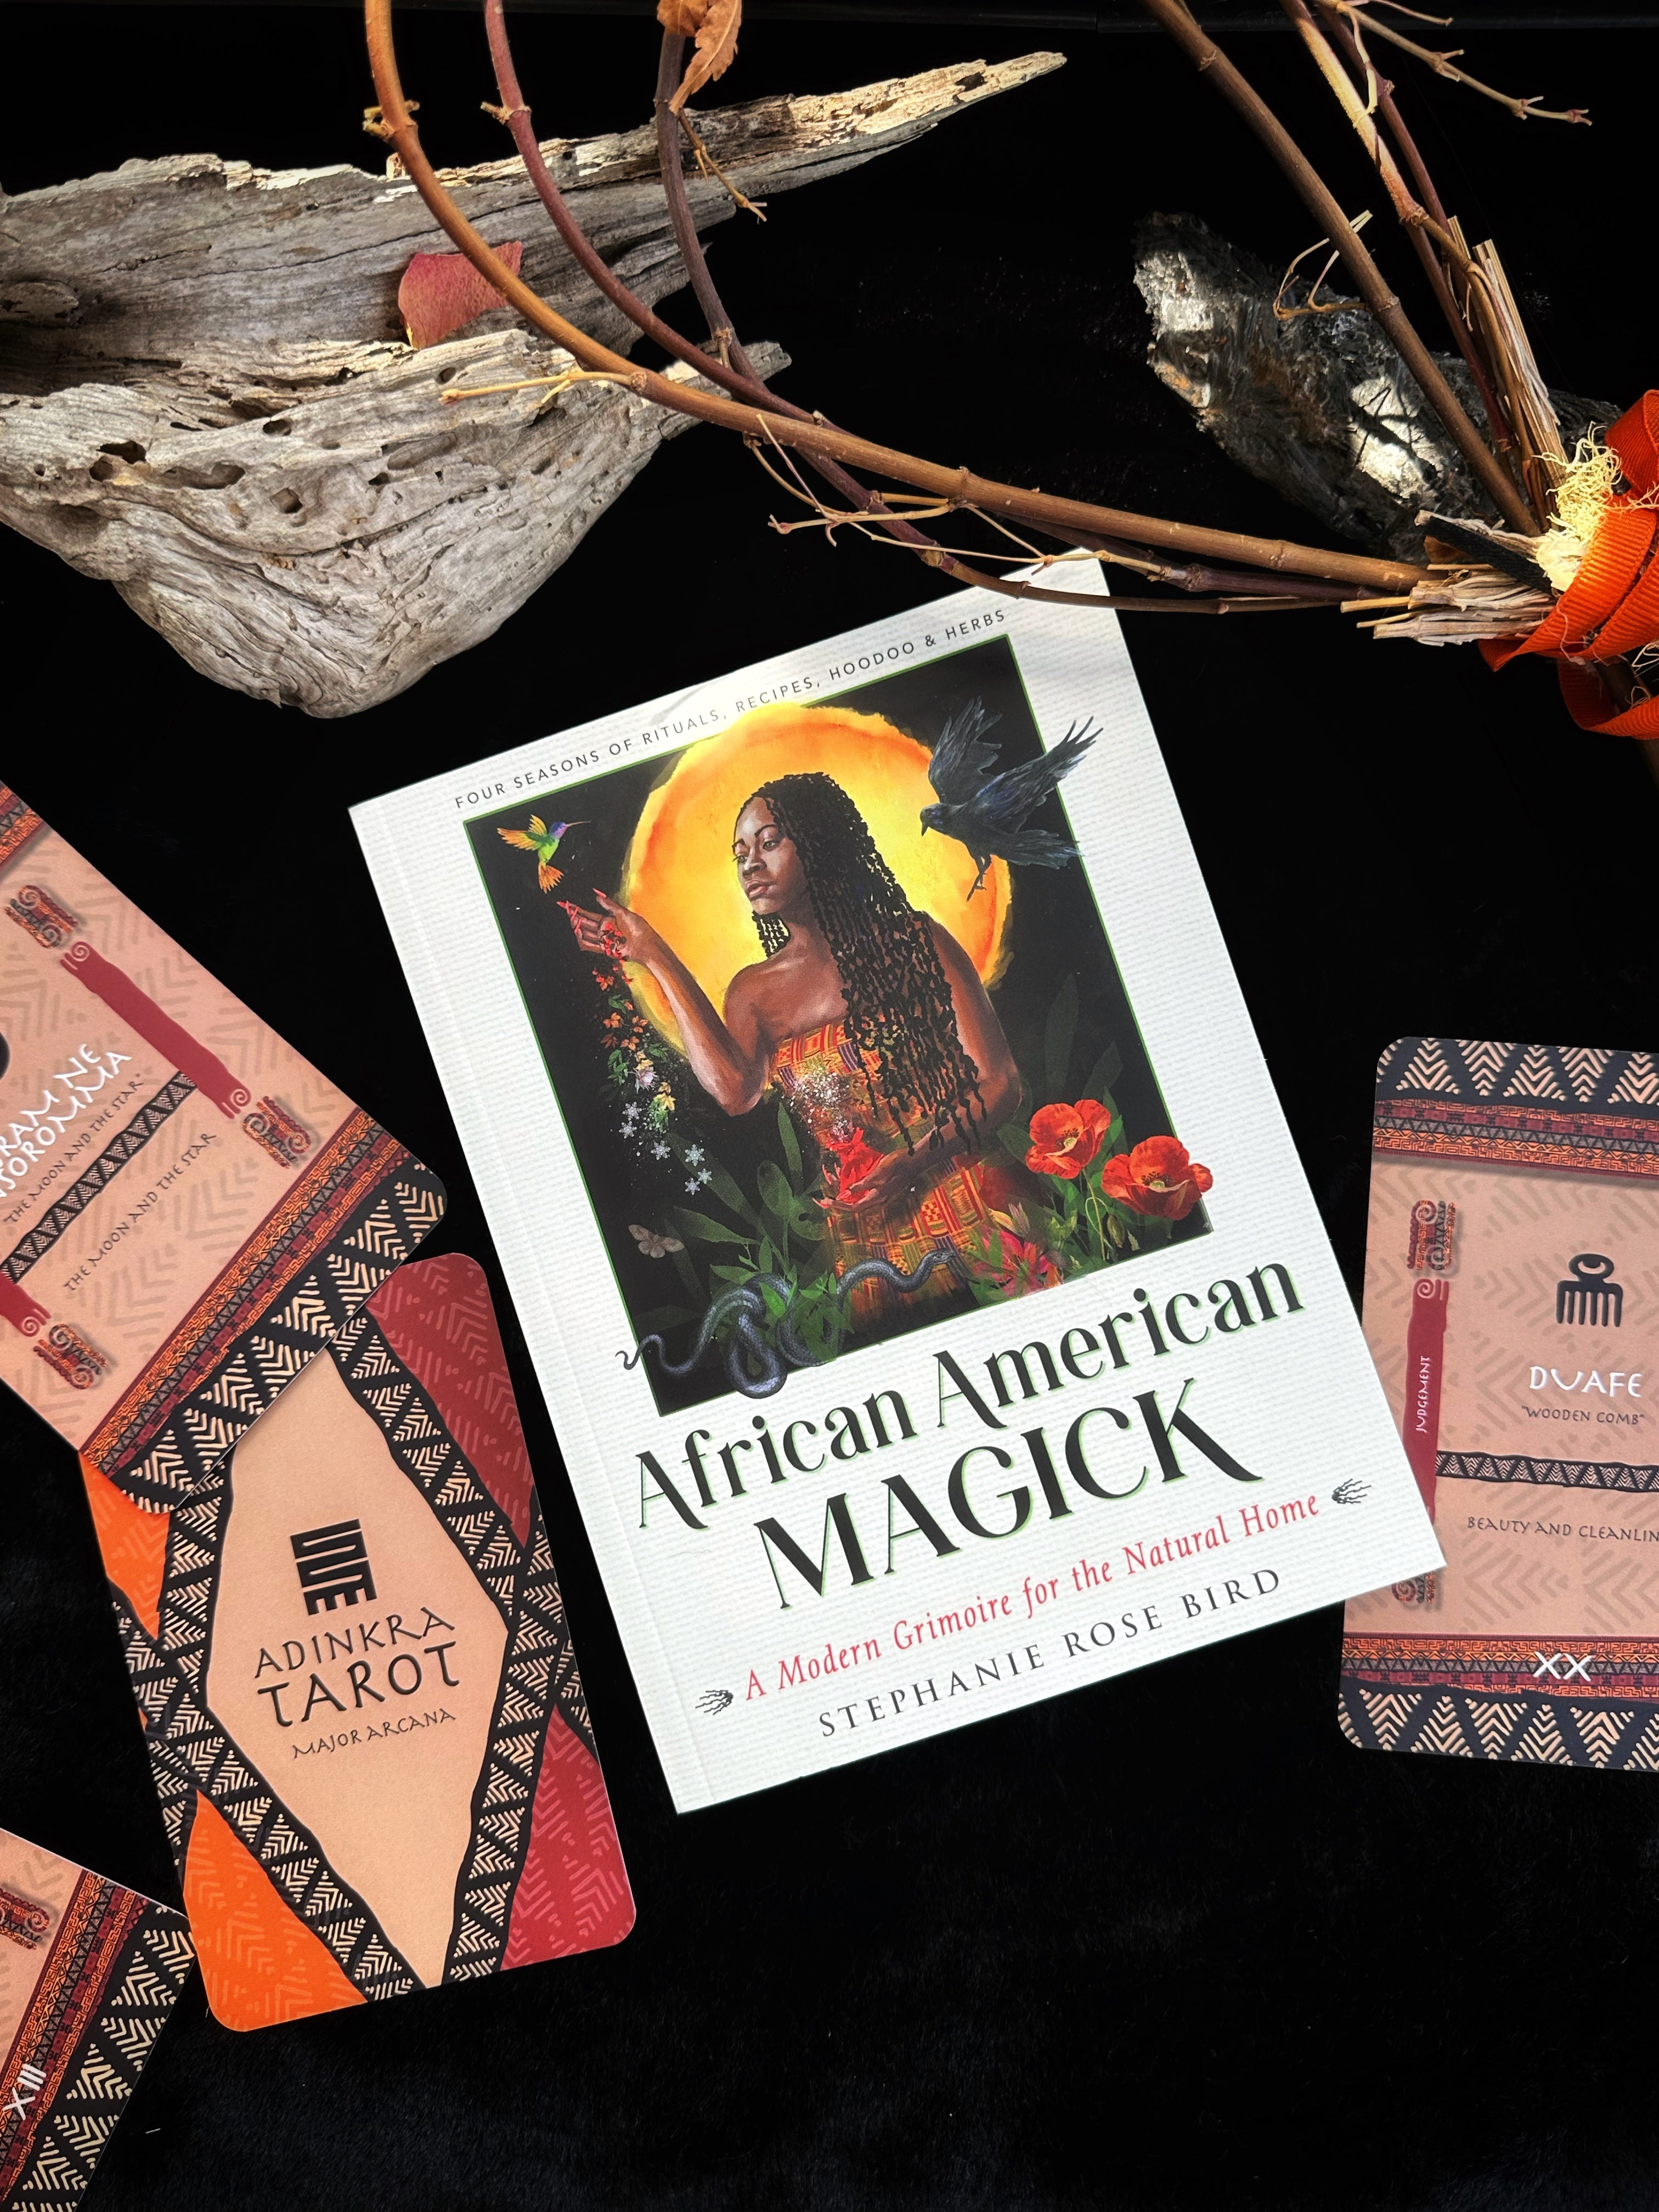 African American Magick : A Modern Grimoire for the Natural Home